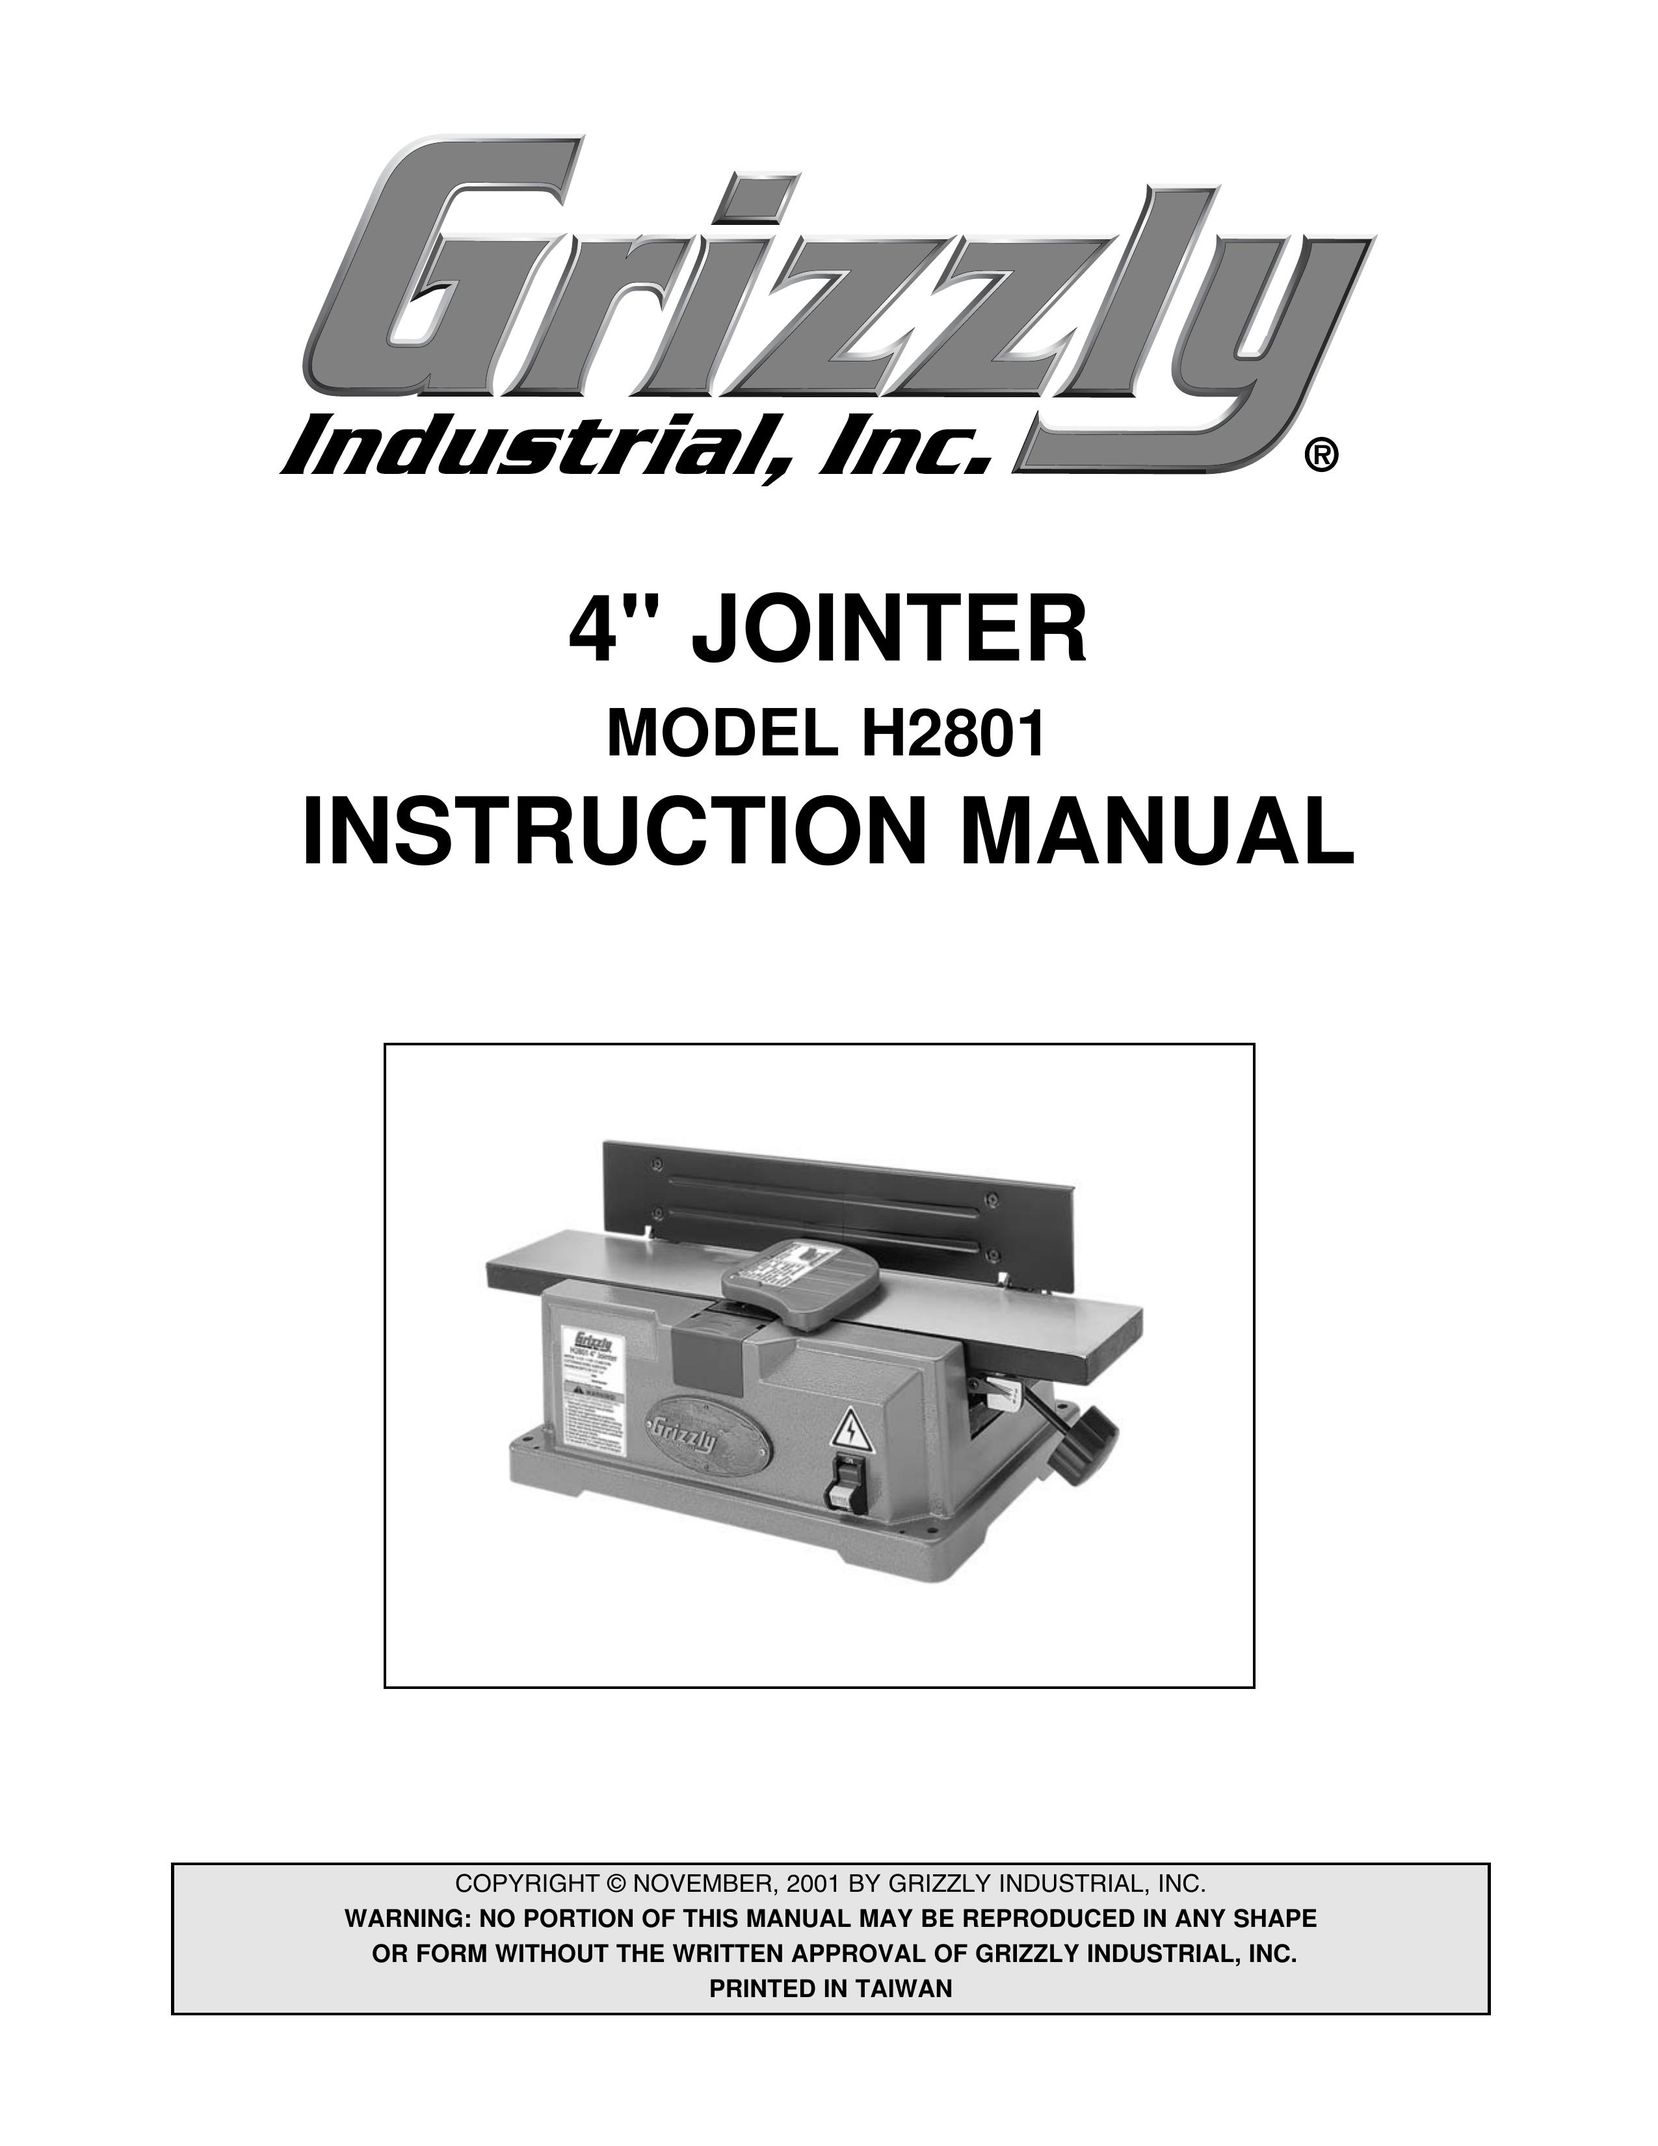 Grizzly H2801 Biscuit Joiner User Manual